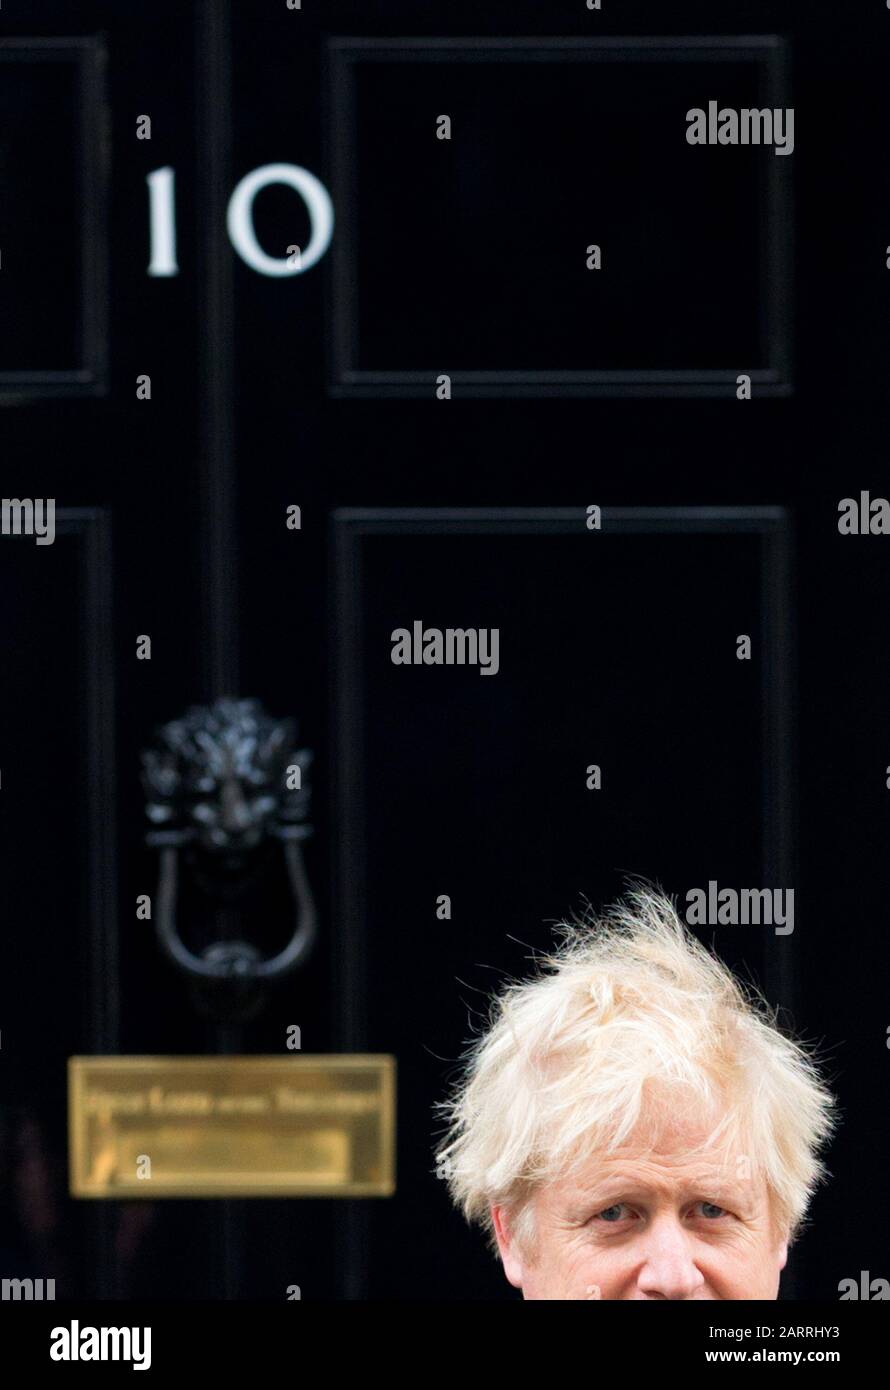 London, UK. 29th Jan, 2020. British Prime Minister Boris Johnson in Downing Street after returning from Prime Ministers Questions in Parliament Credit: PjrFoto/Alamy Live News Stock Photo